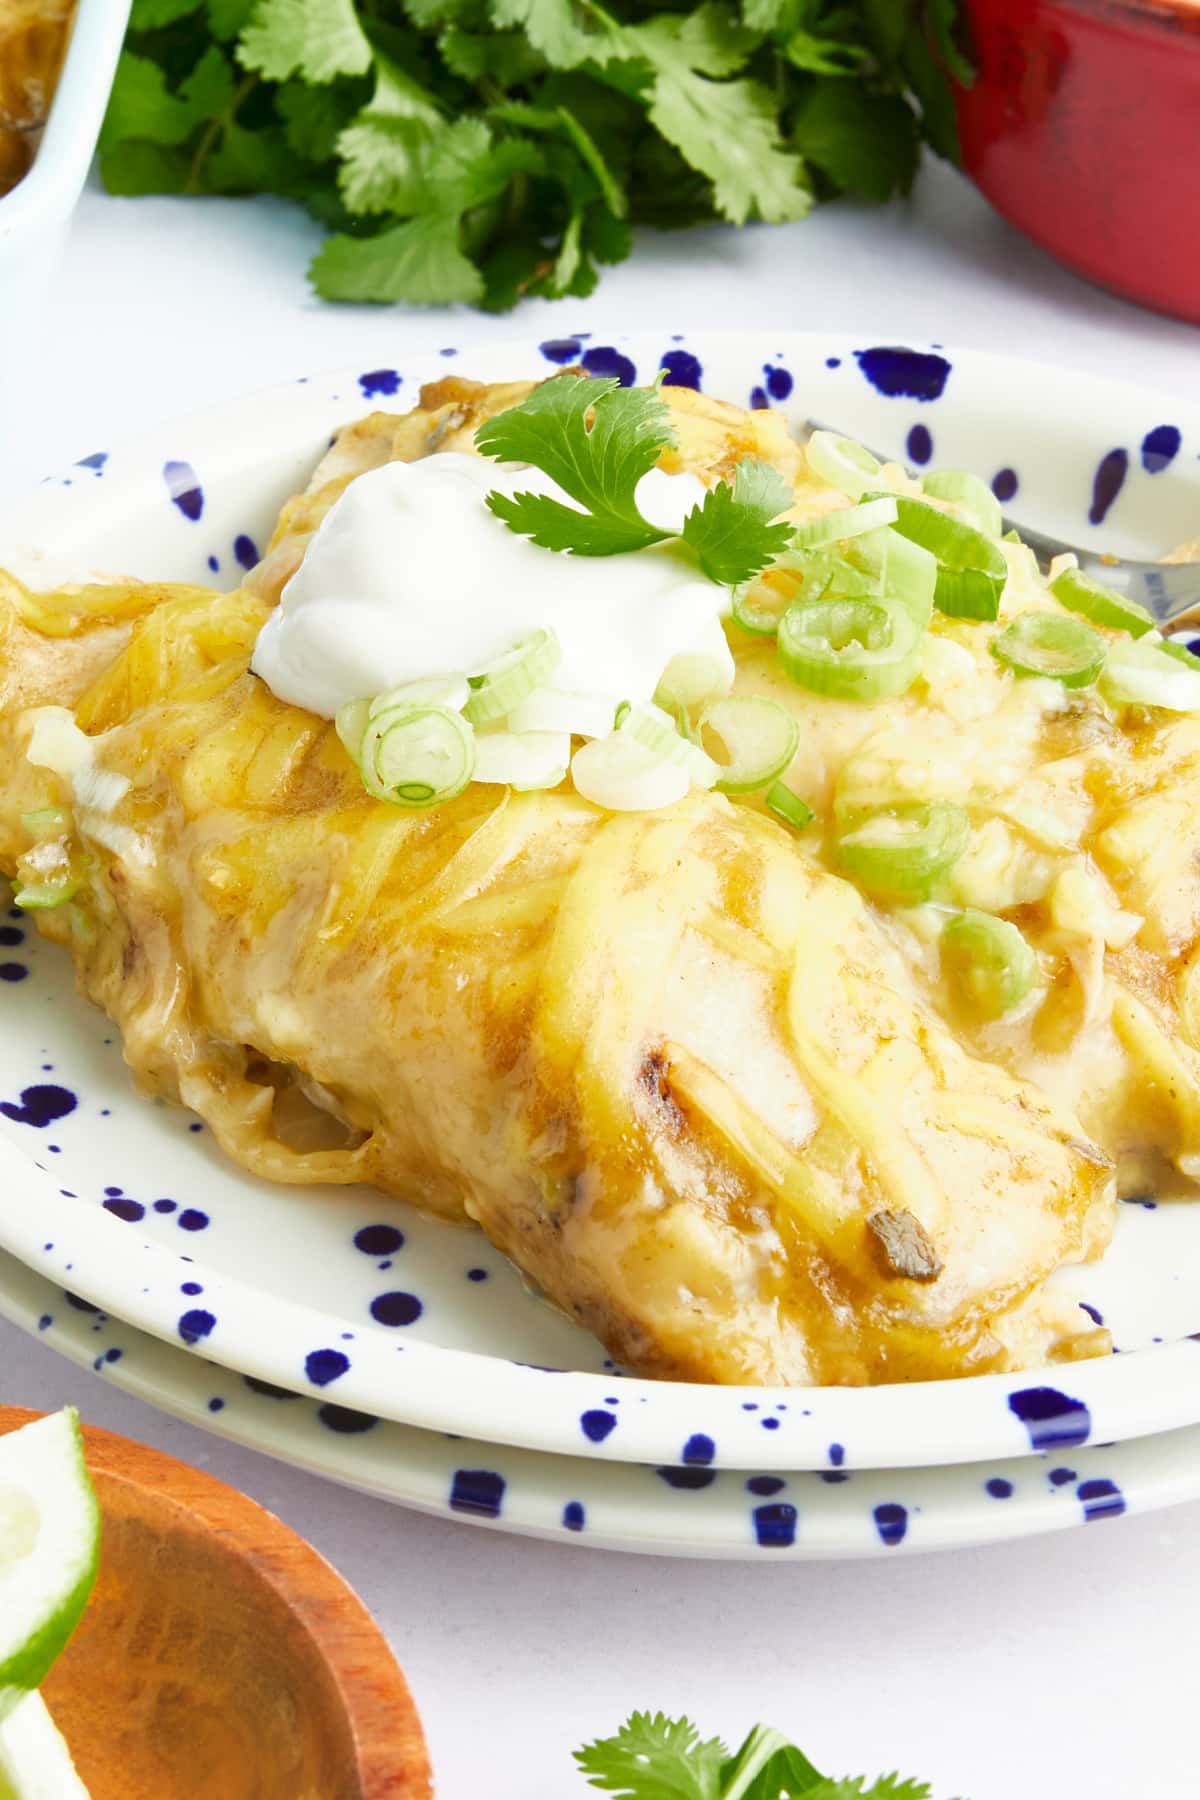 Two dairy free enchiladas on a plate, garnished with sour cream, sliced green onions, and parsley.